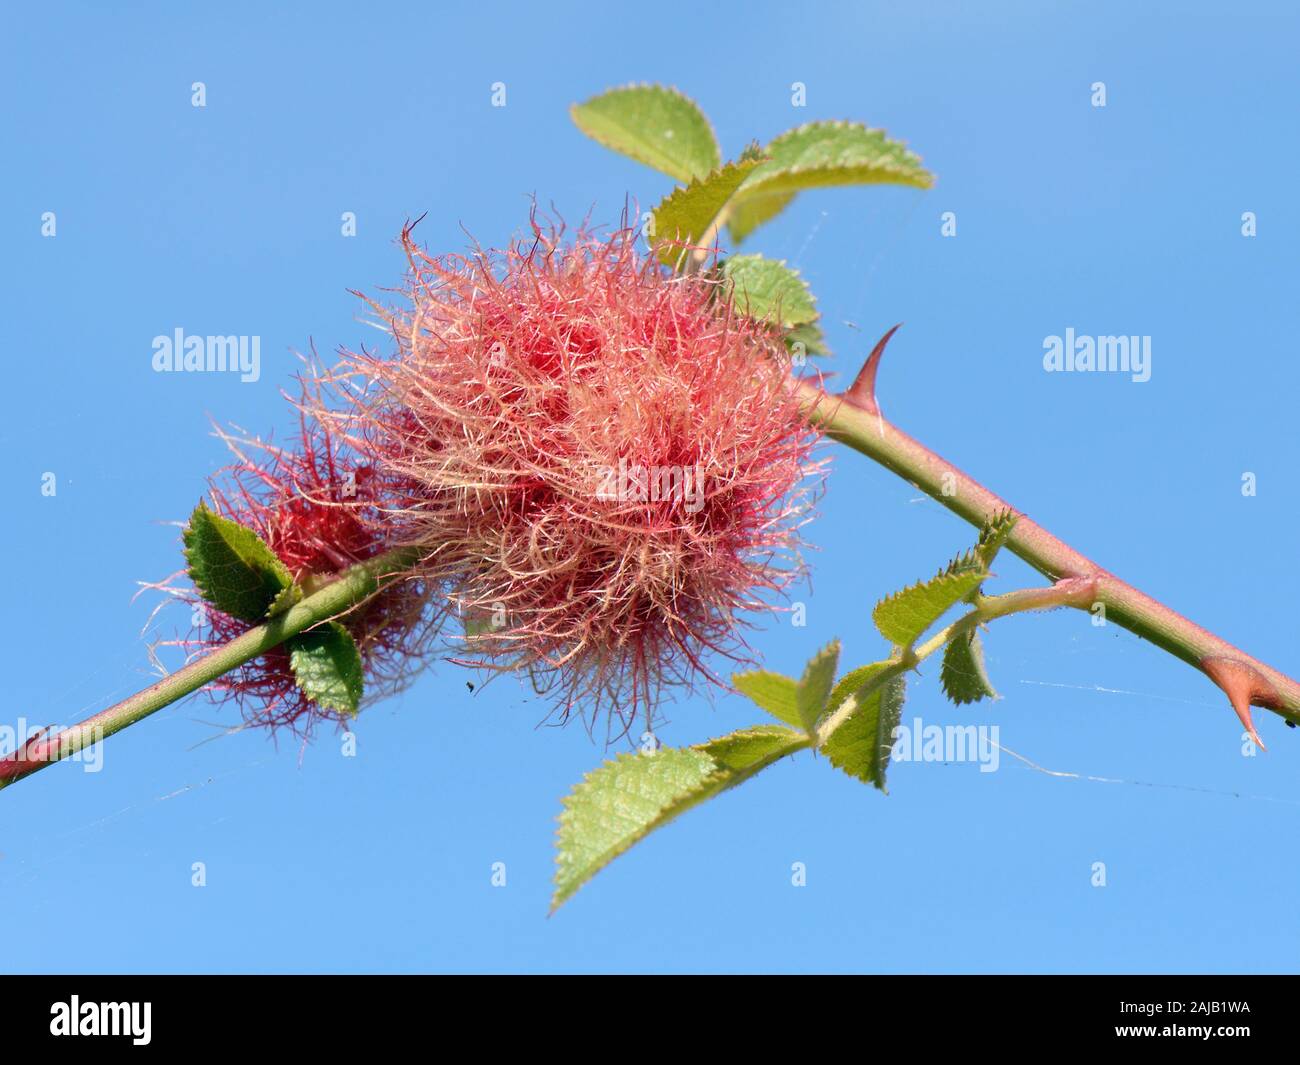 Robin's pincushion gall on Dog rose (Rosa canina) stem caused by the Bedeguar gall wasp (Diplolepis rosae), Wiltshire, UK, September. Stock Photo